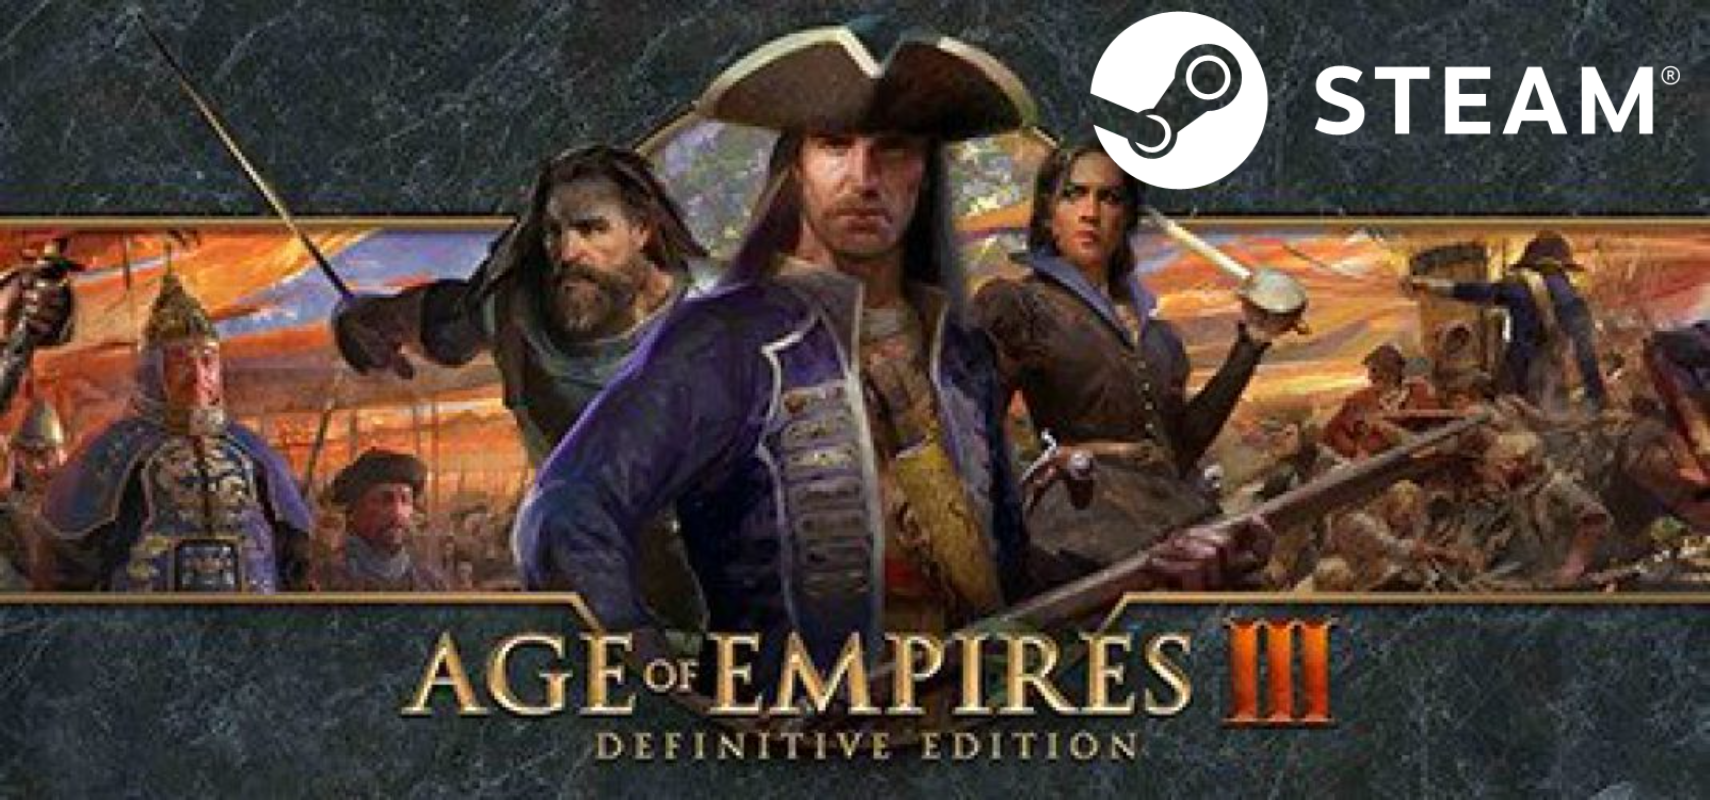 Age empires iii steam фото 49